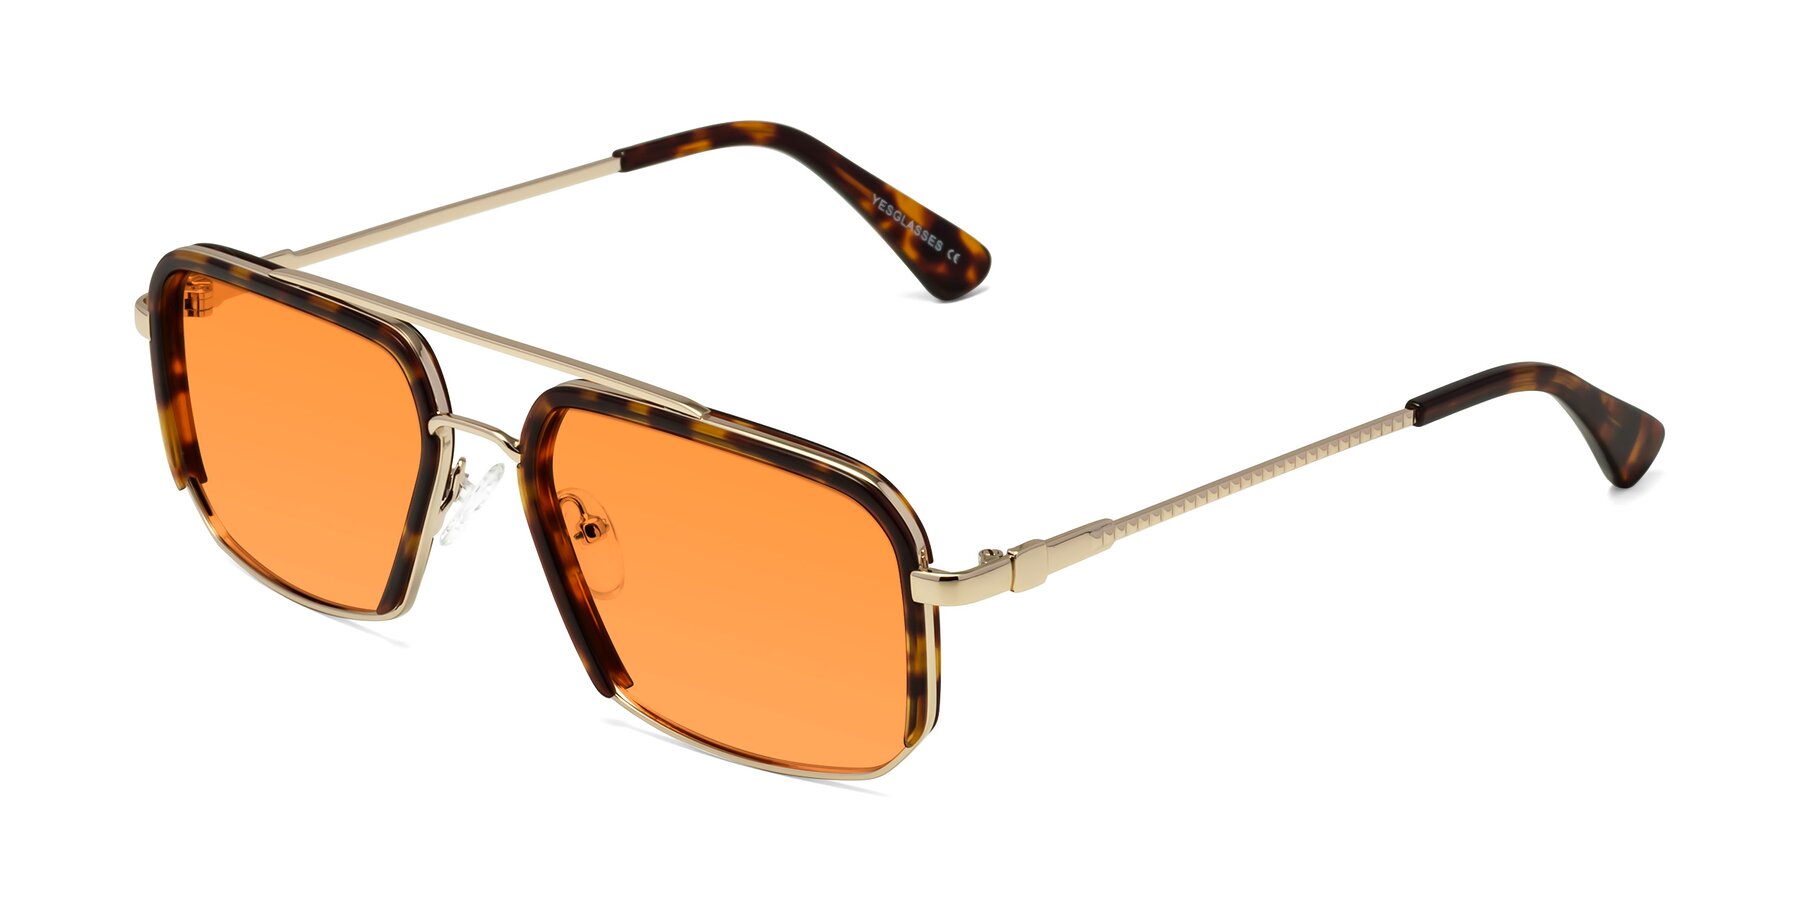 Angle of Dechter in Tortoise-Gold with Orange Tinted Lenses